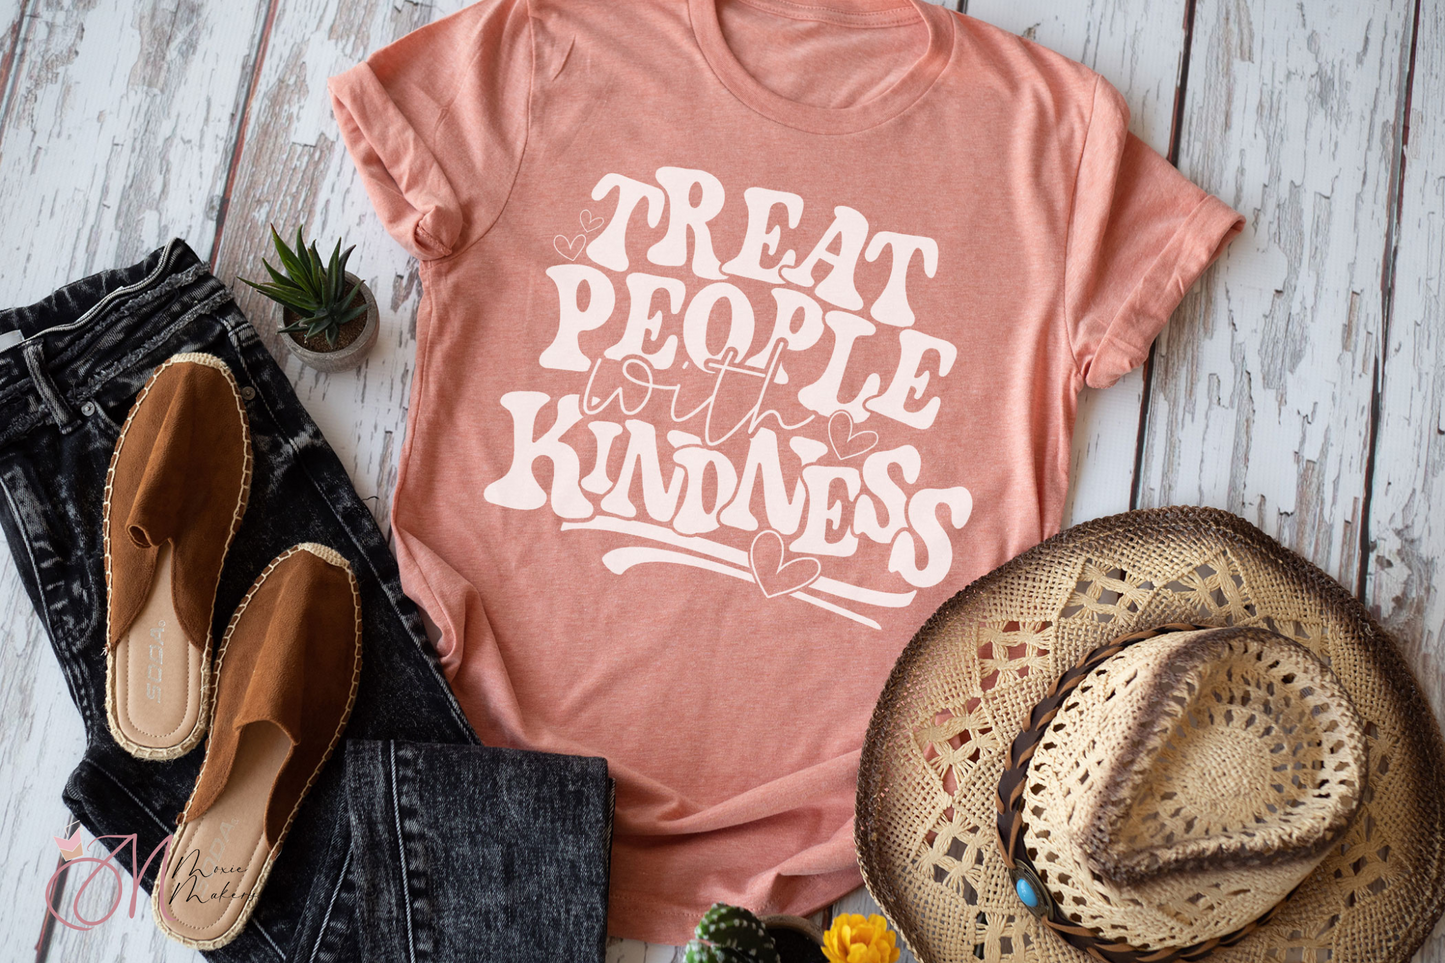 Treat People with Kindness Tee